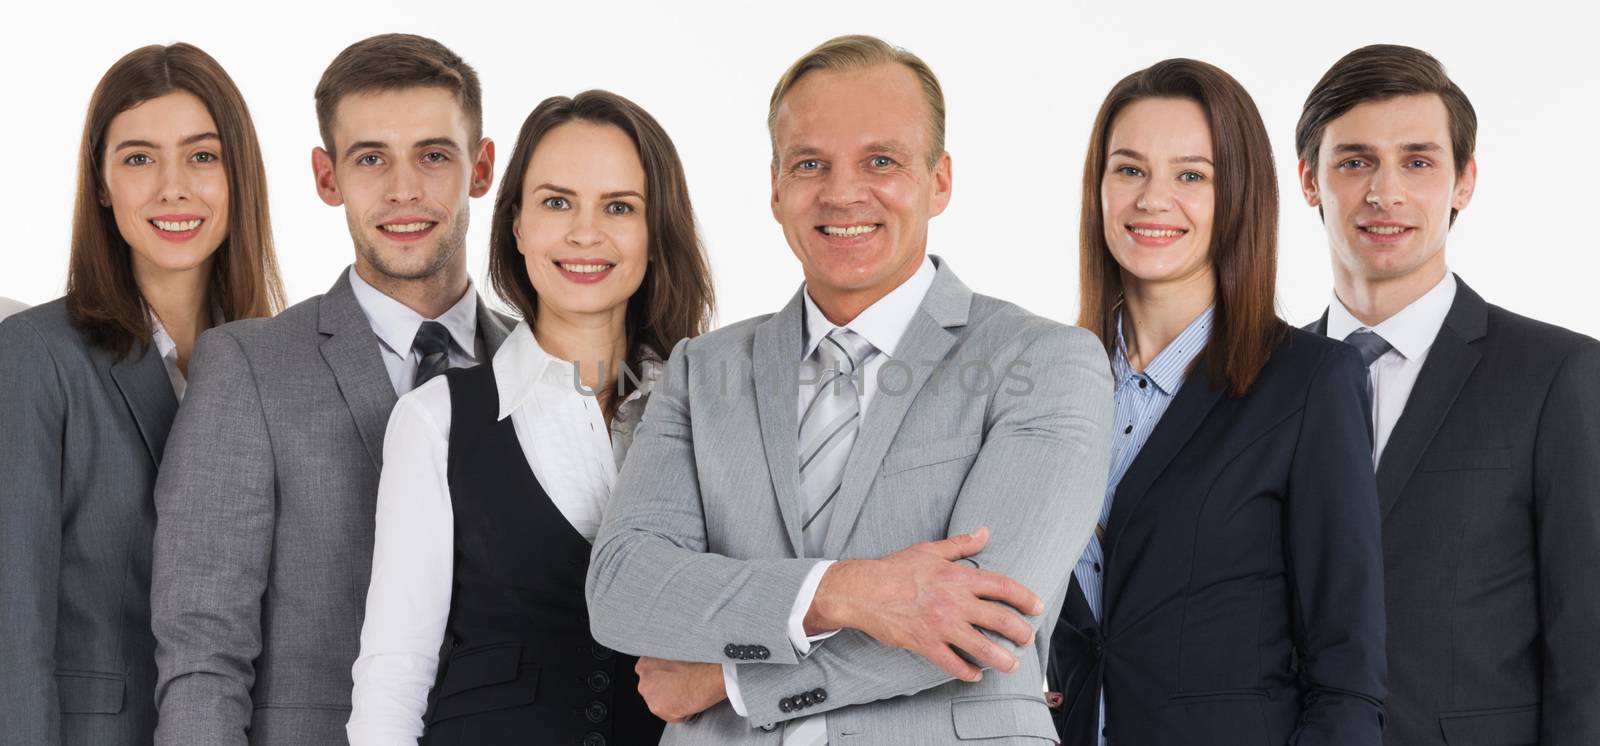 Group of business people isolated over white background